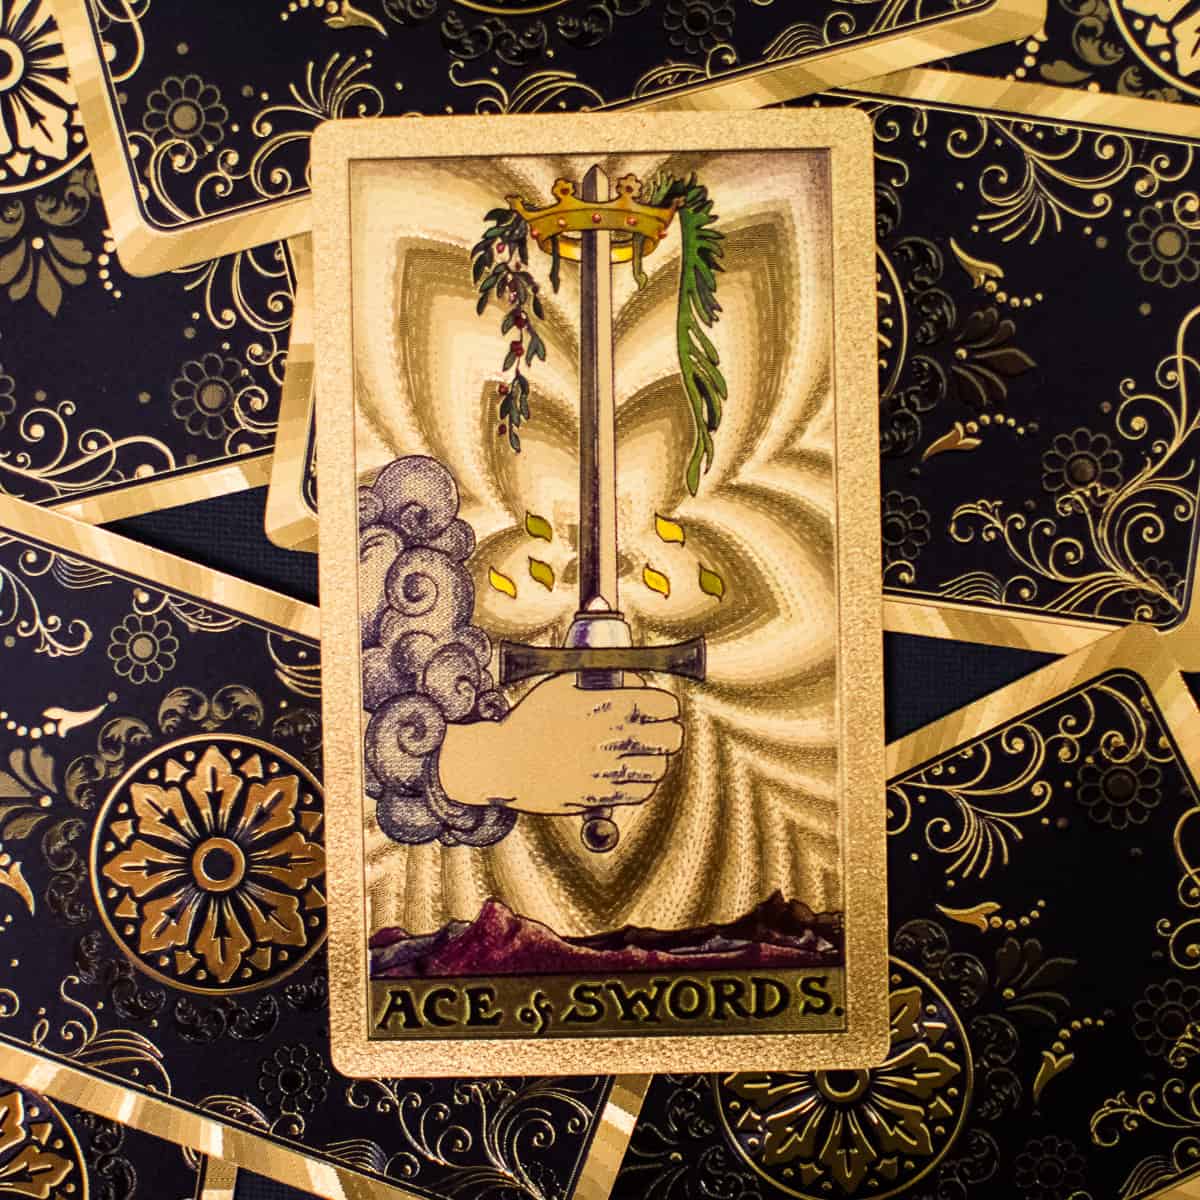 Hand emerging from clouds holding sword with crown on tarot card.